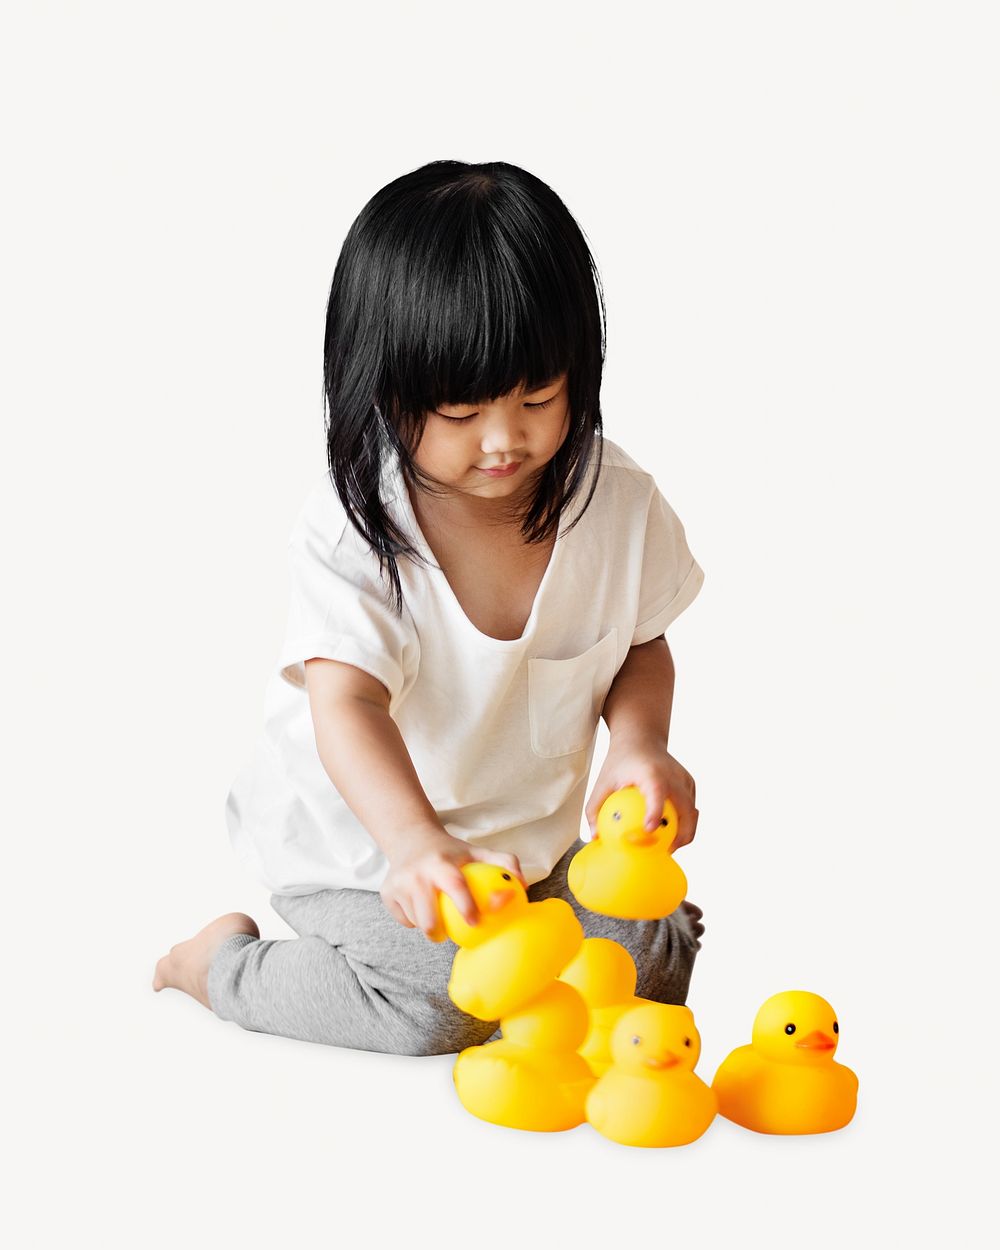 Little girl playing with rubber ducks, isolated image